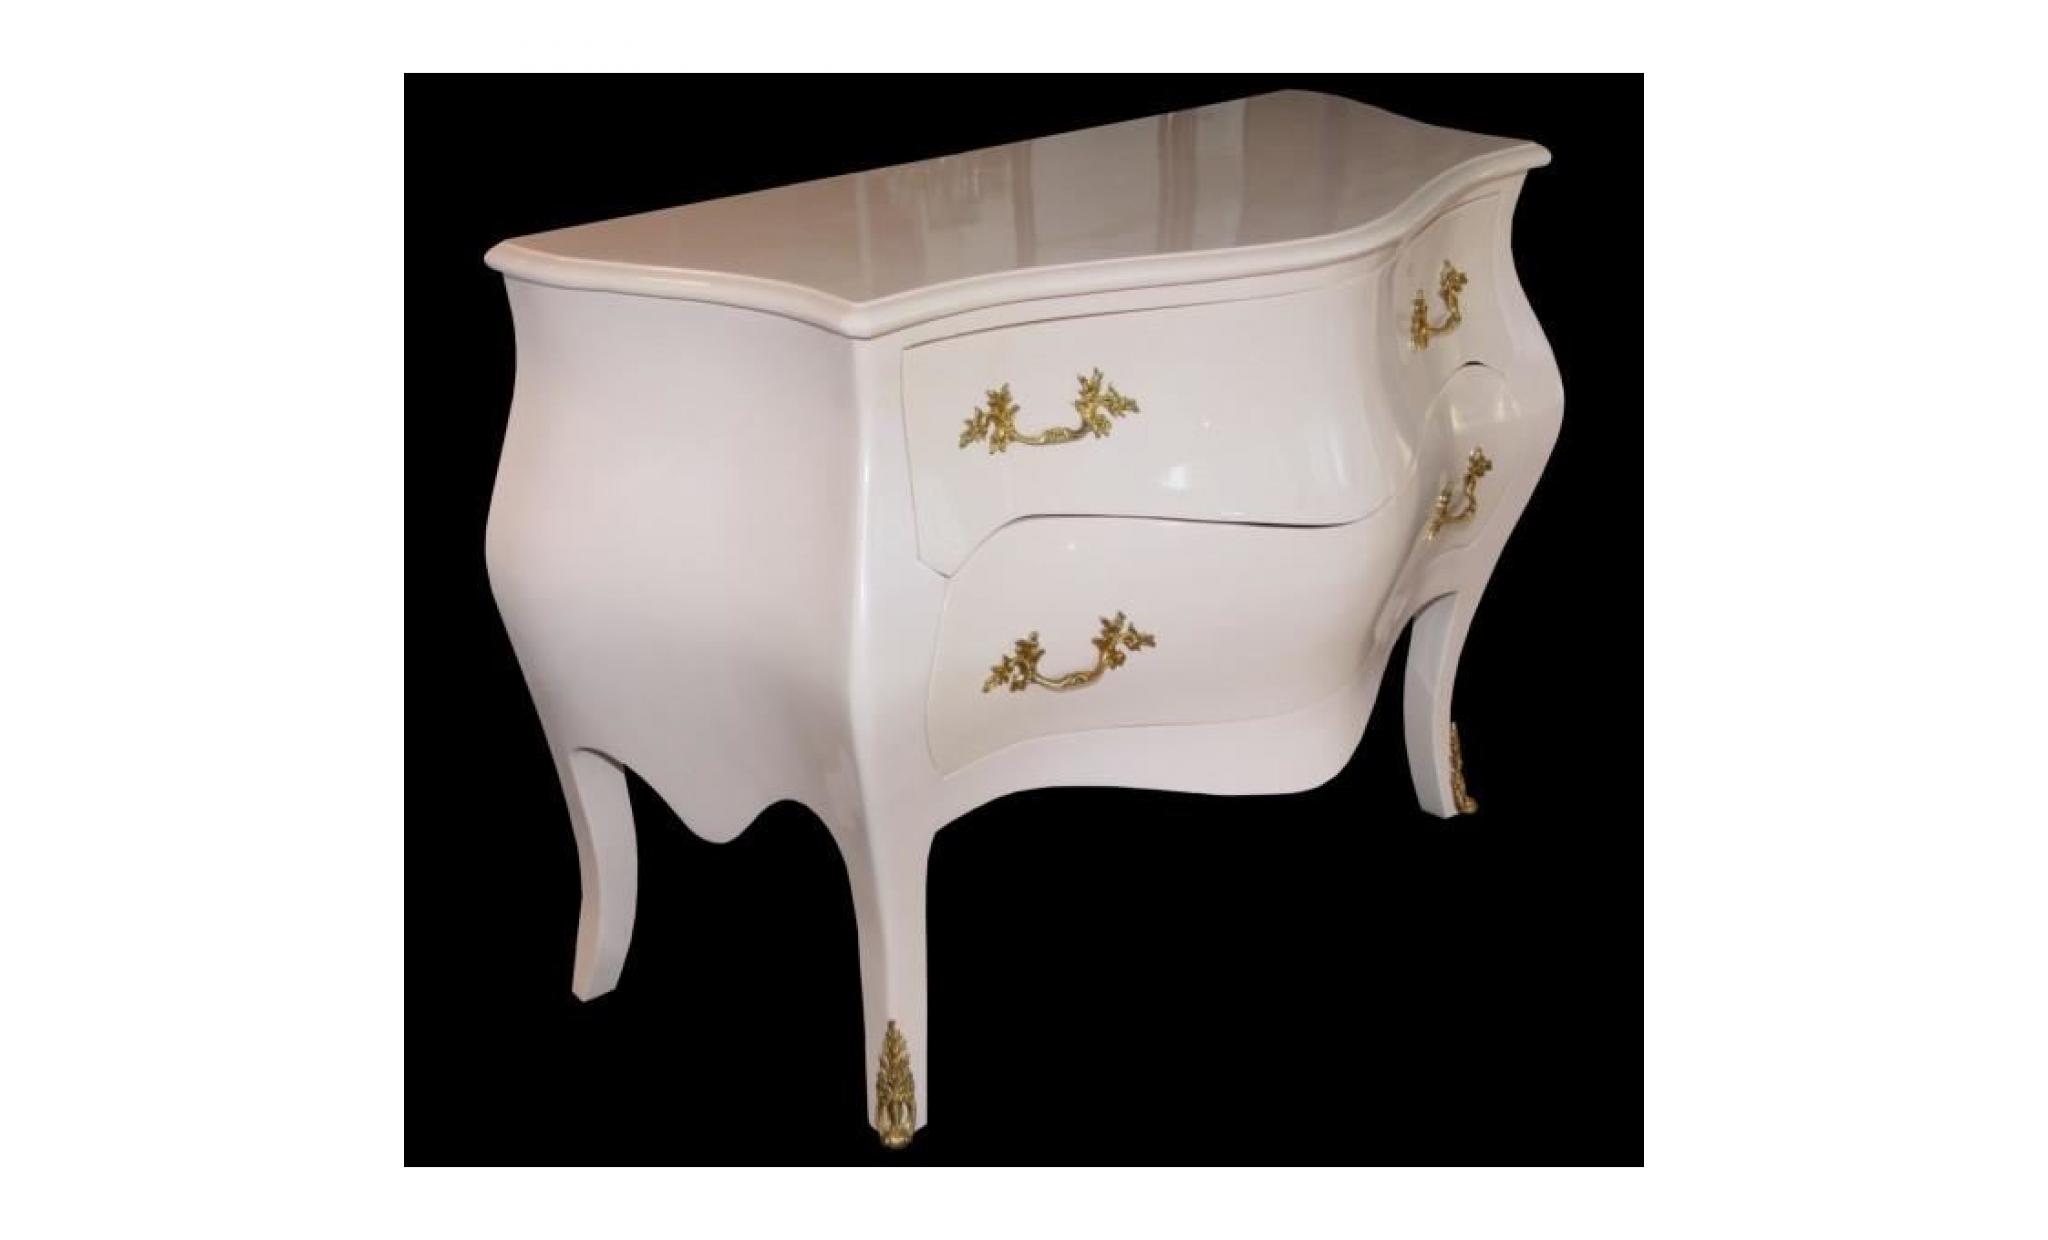 casa padrino baroque commode pink / gold 130 x 87 x 58 cm   baroque furniture   limited edition pas cher